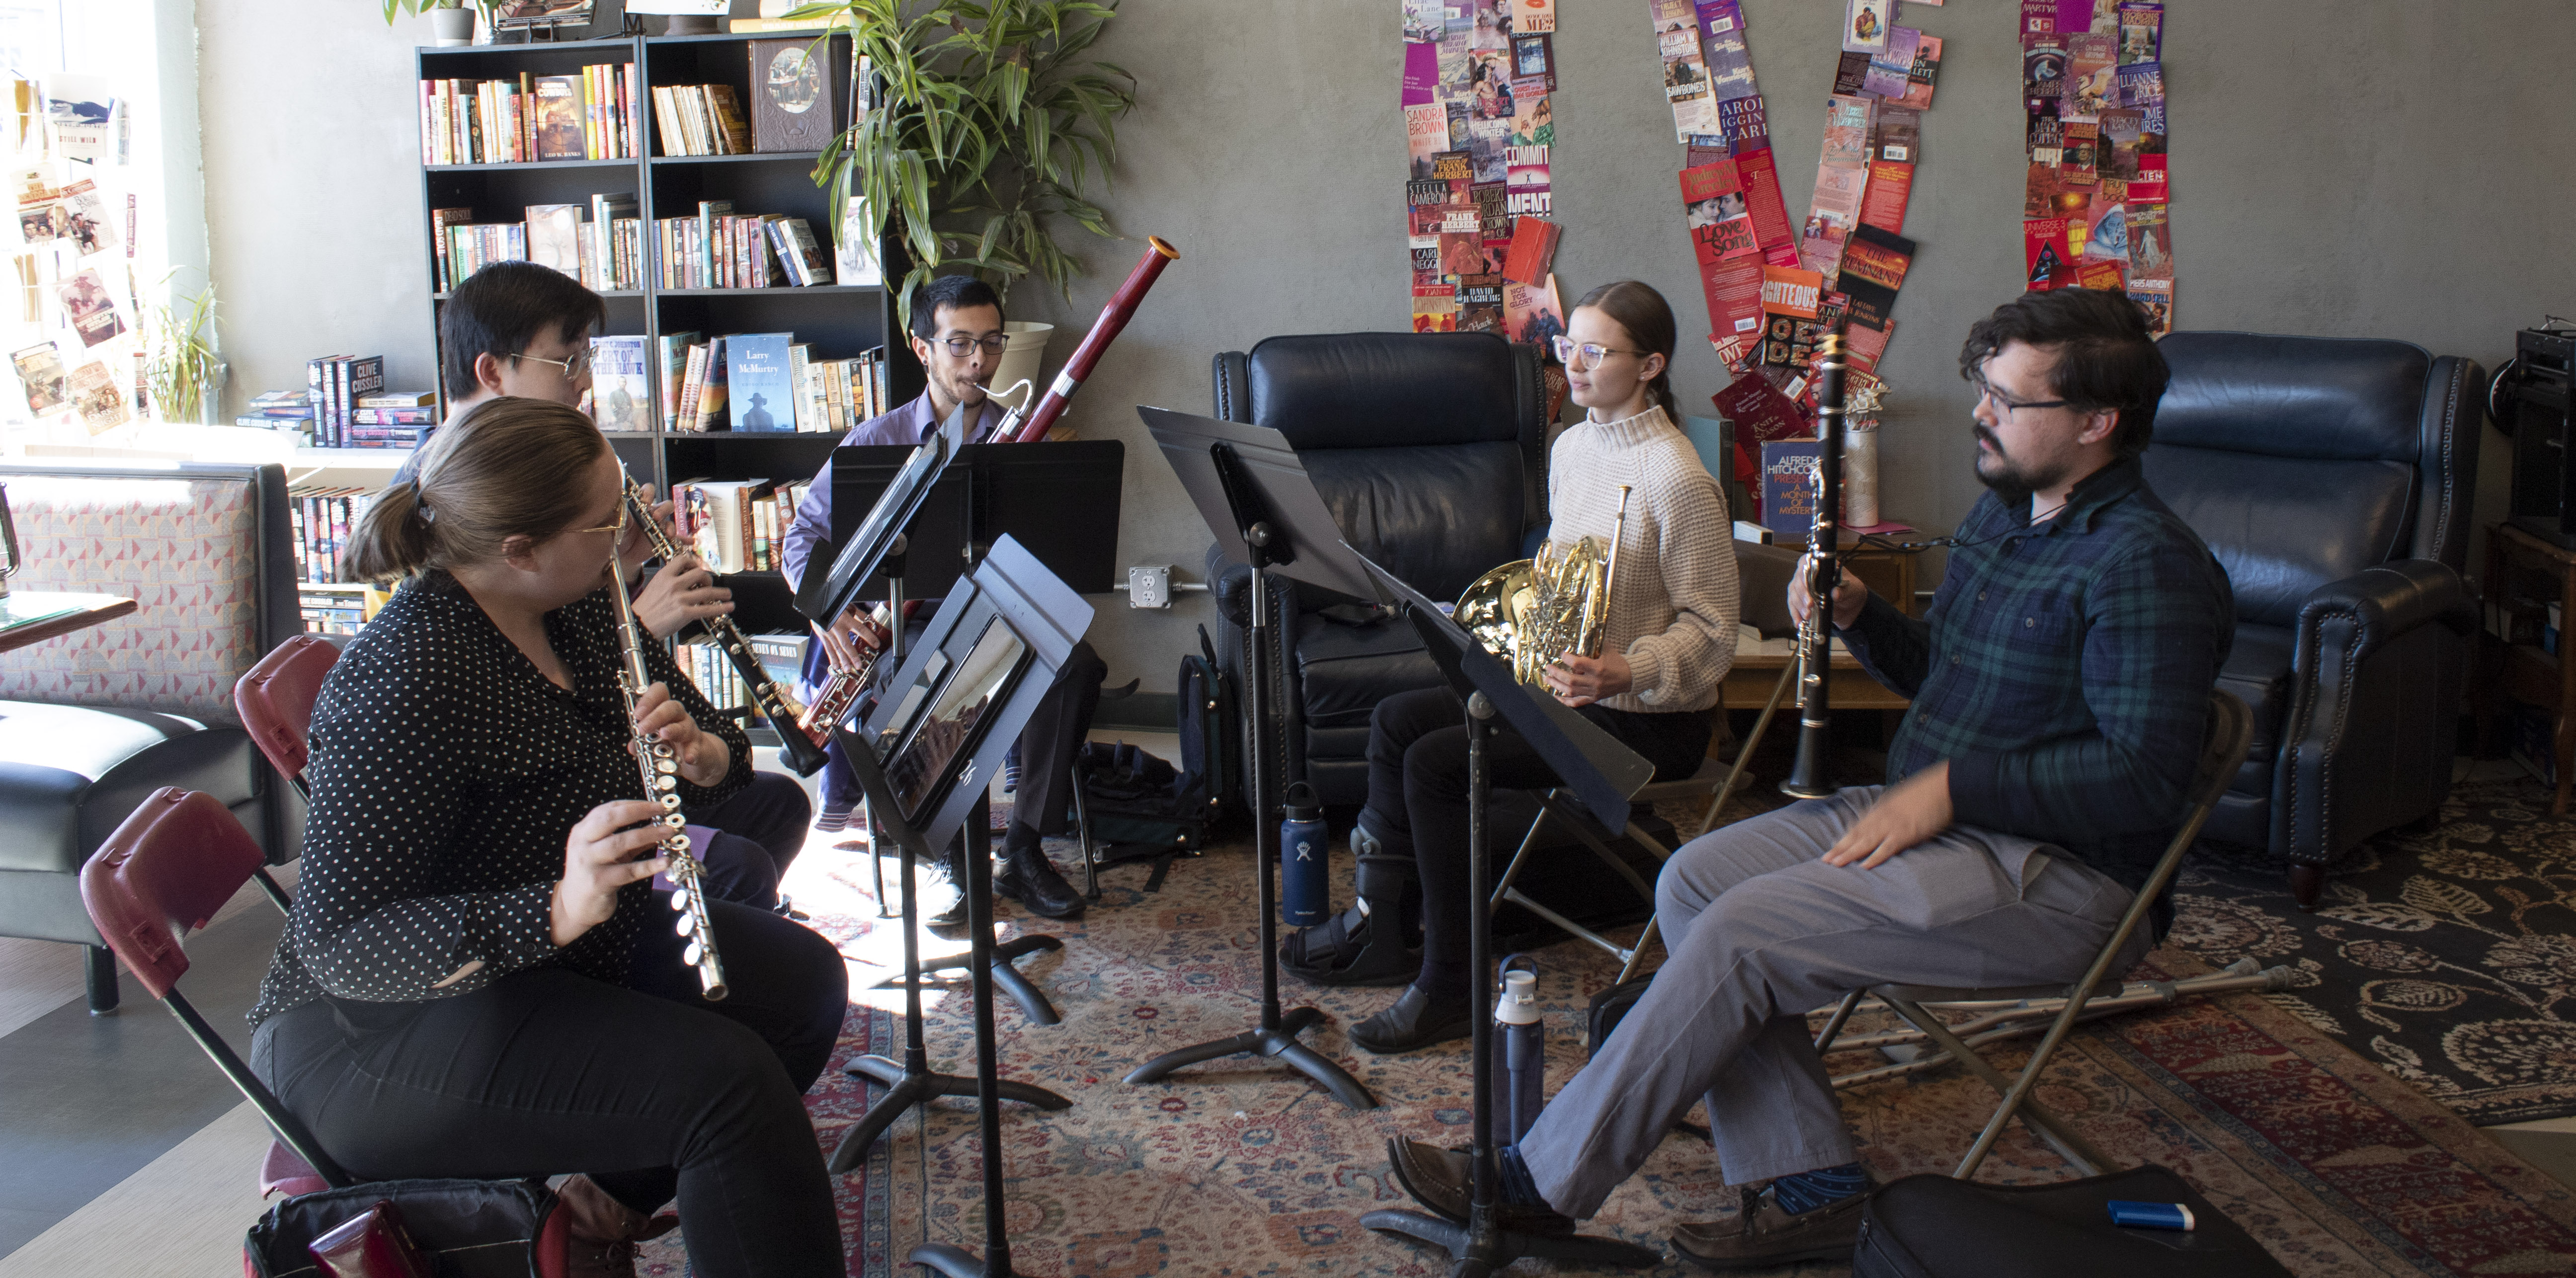 The Bear Lake Woodwind Ensemble performing at the Midnight Oil Bookstore in Downtown Greeley.